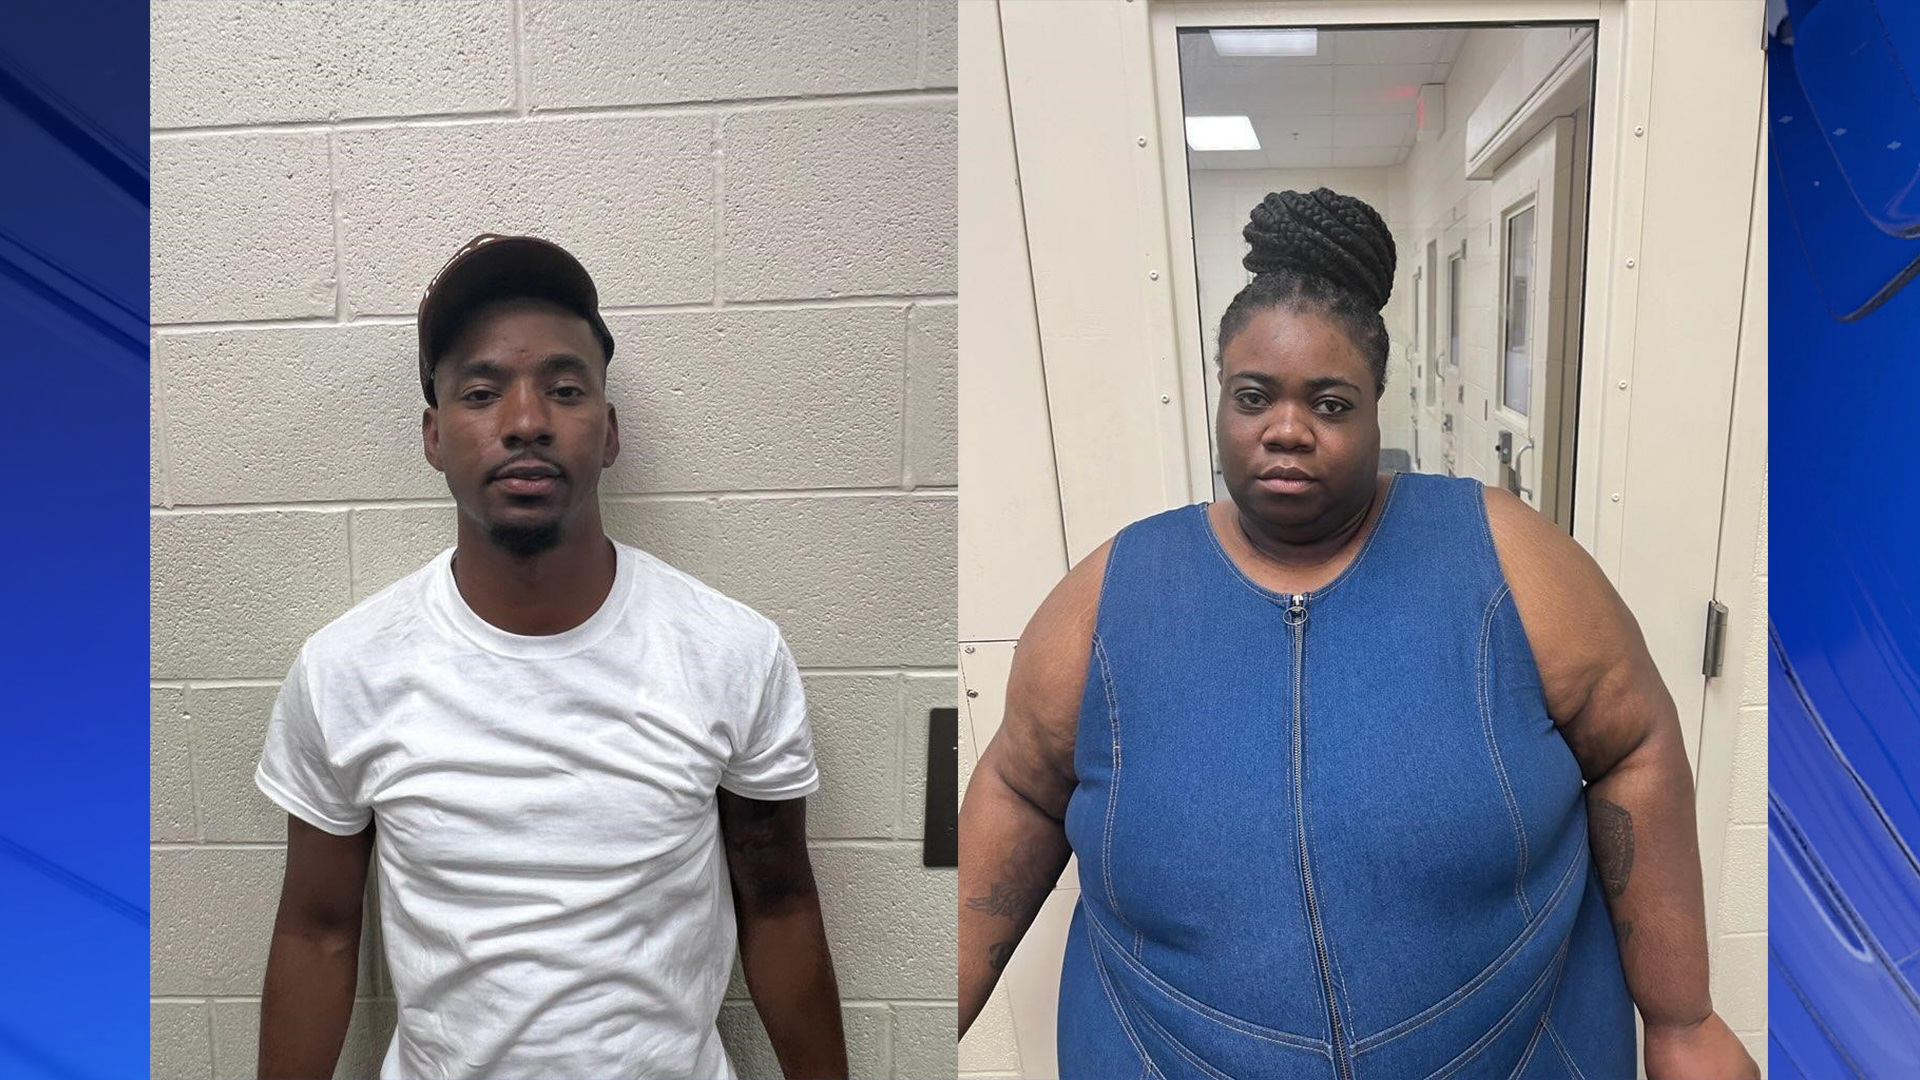 Two arrested for operating unlicensed nightclub in Decatur